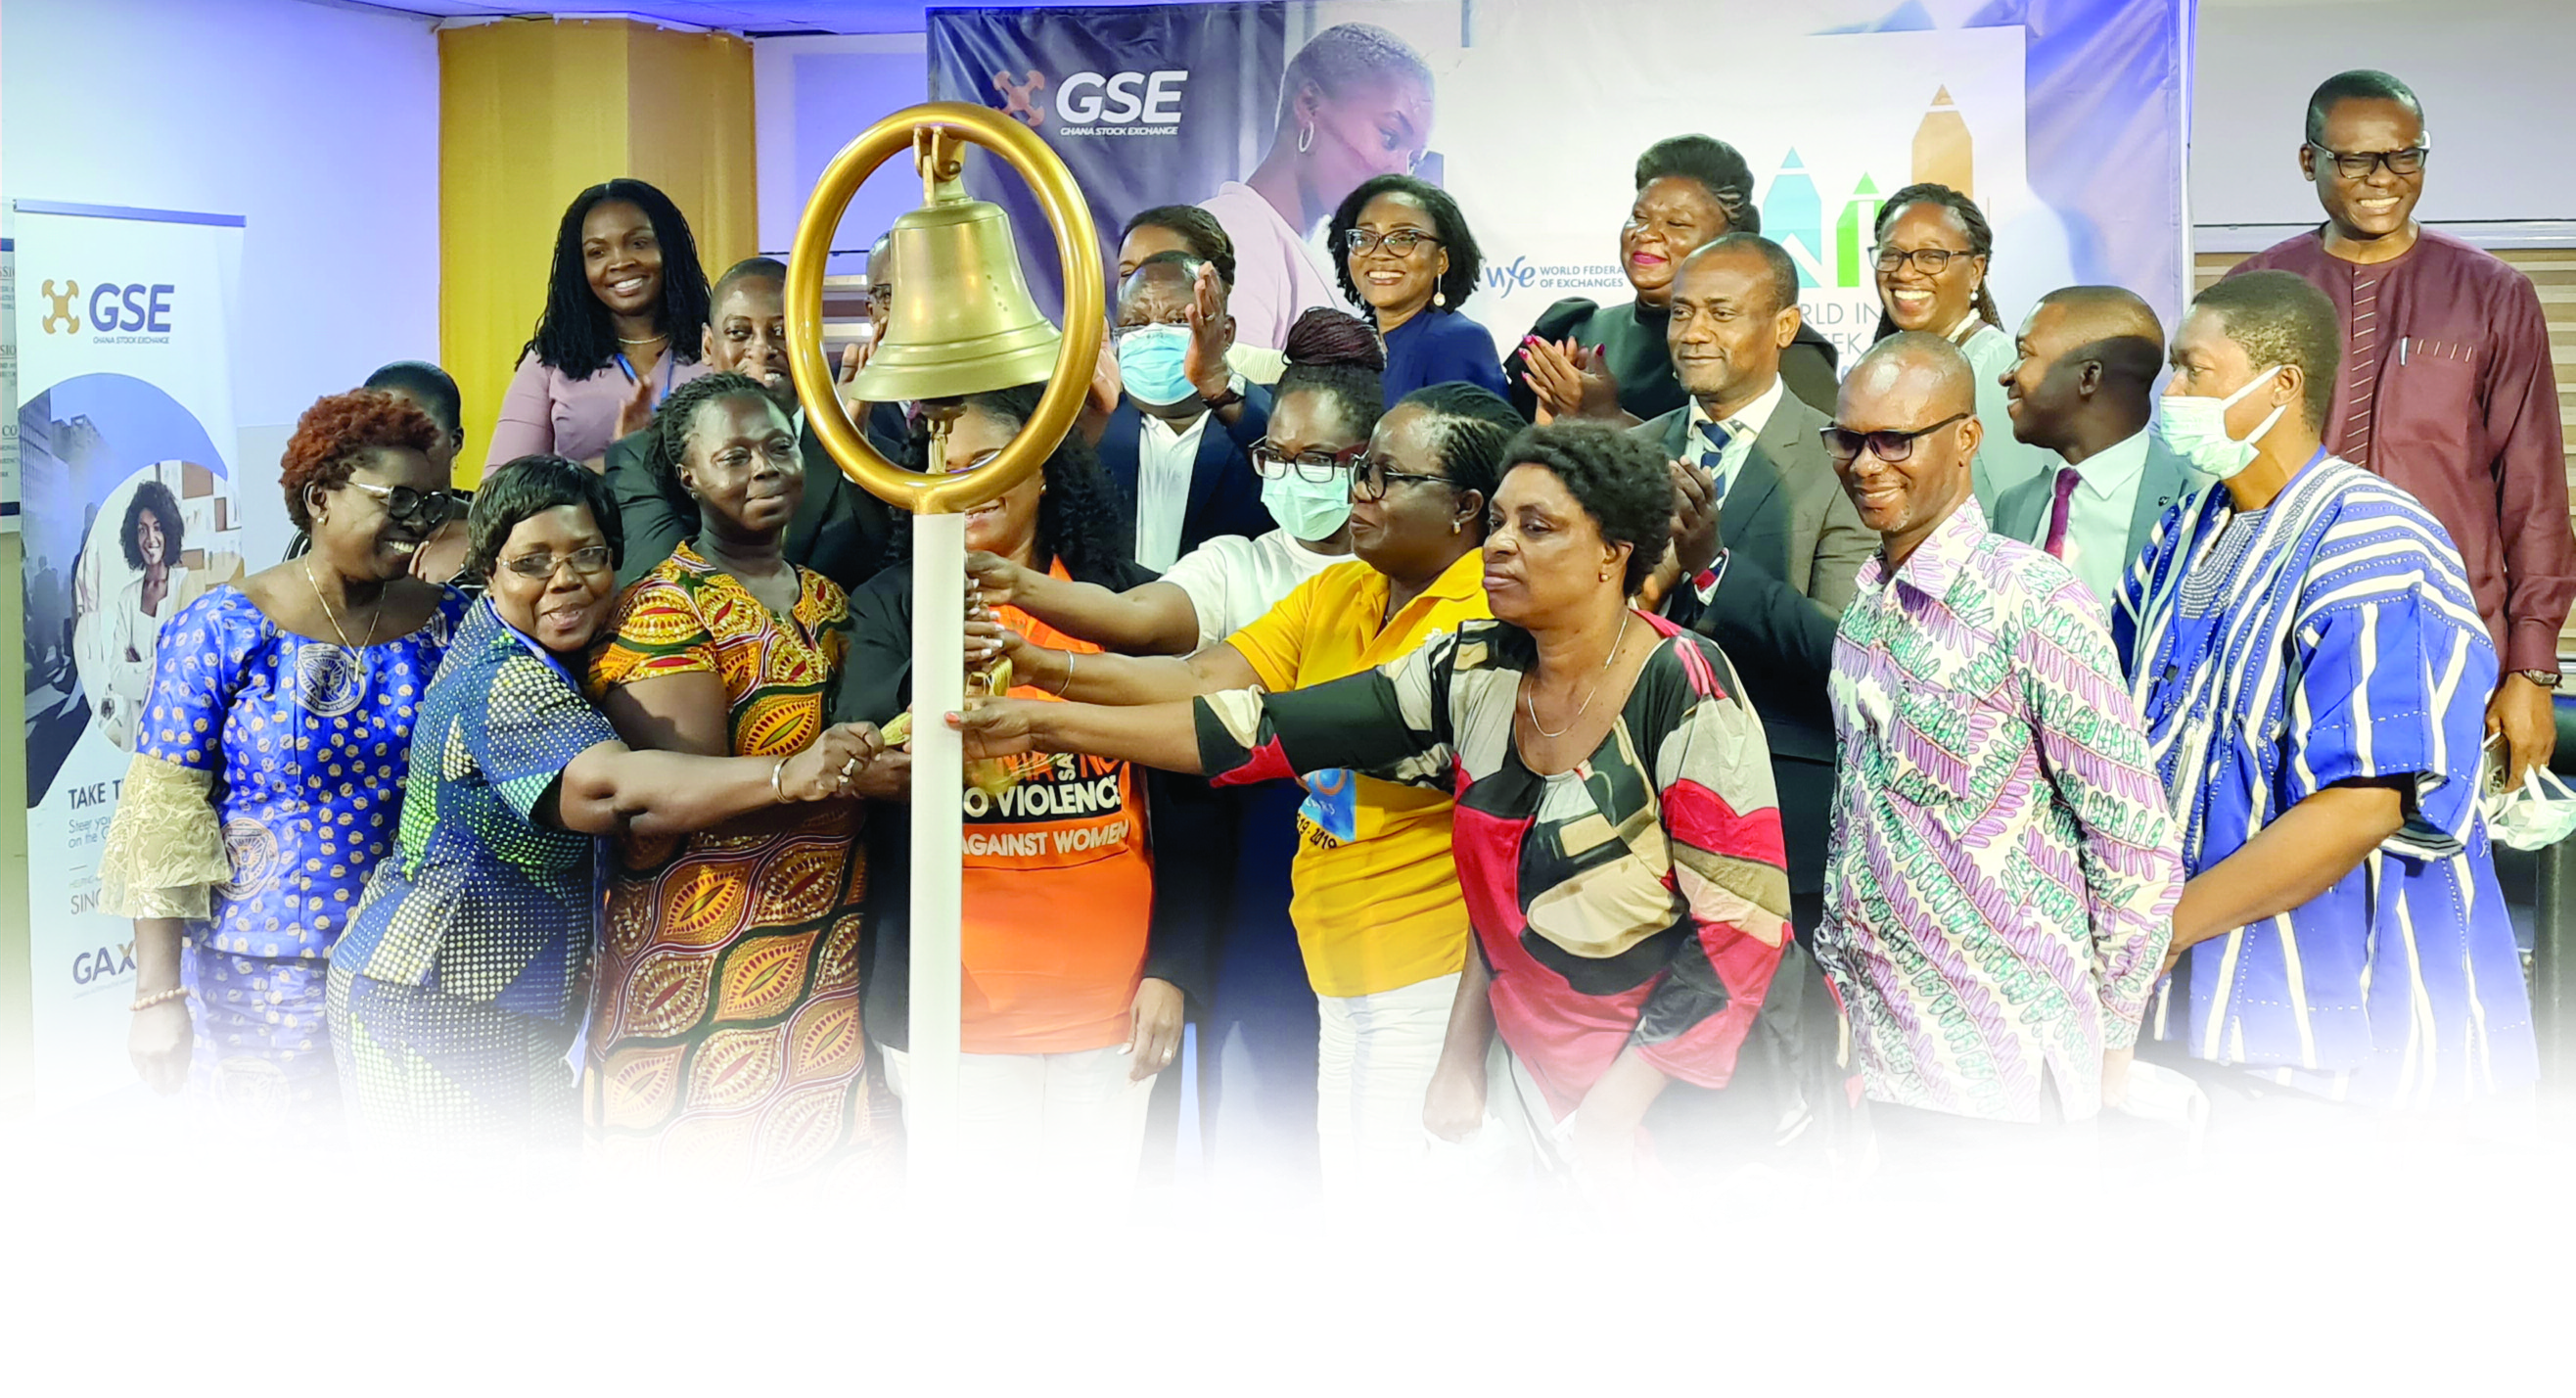 Reviving investor confidence: GSE rings bell to celebrate financial literacy week